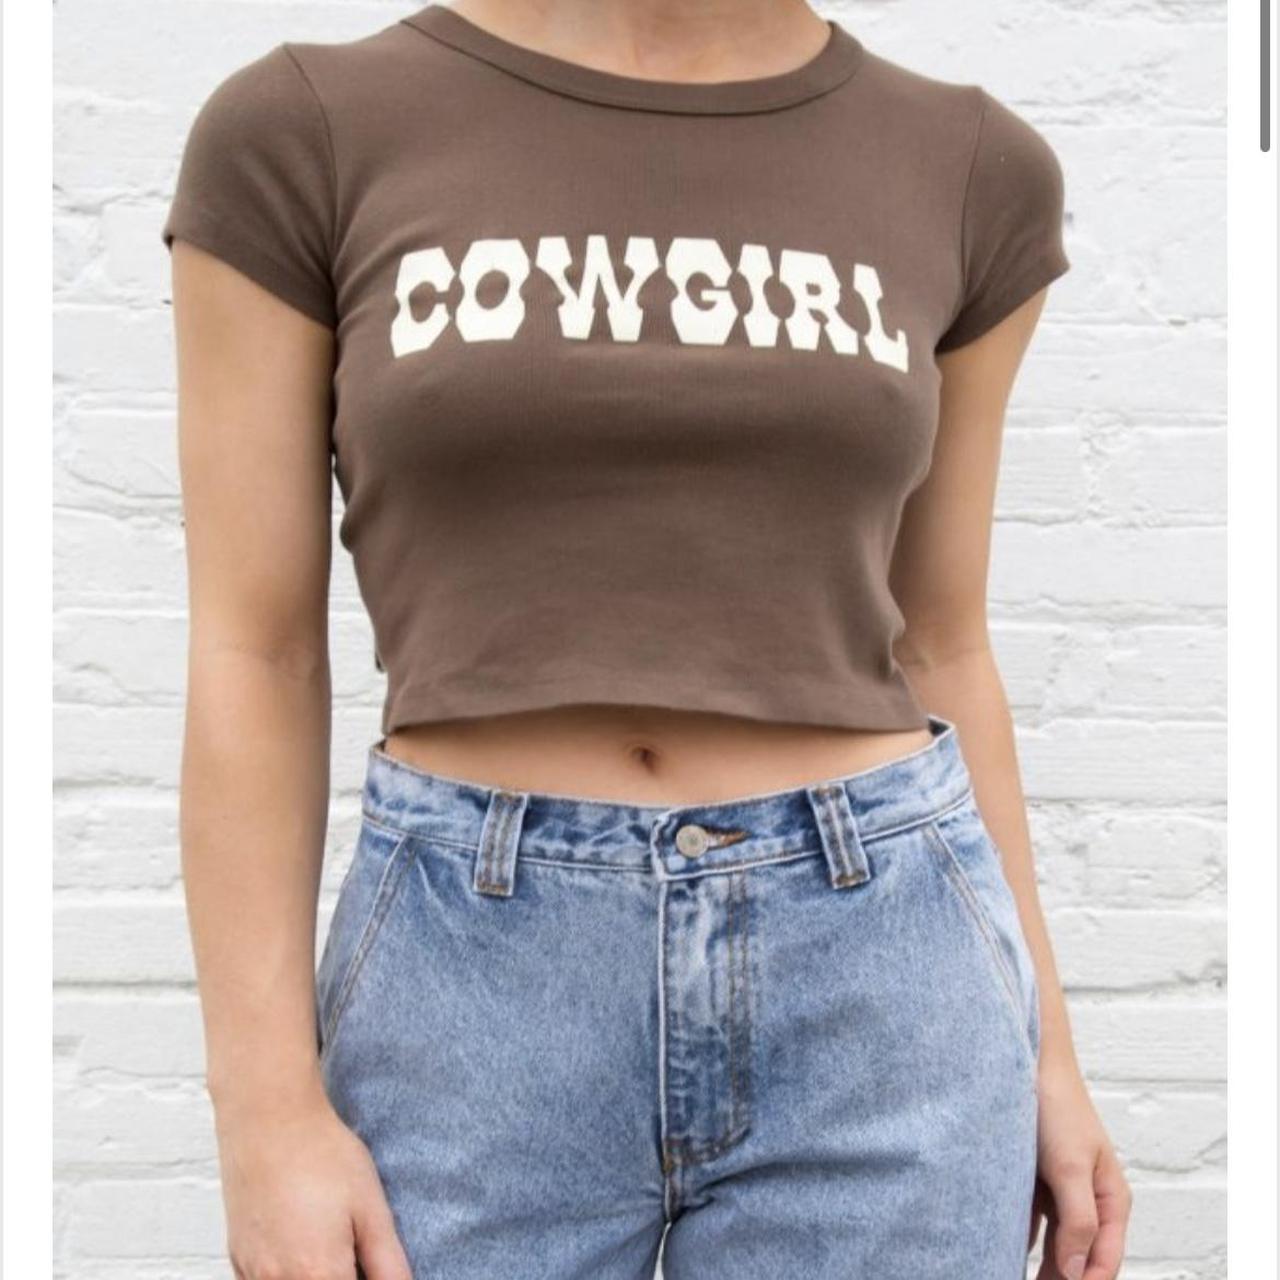 Brandy melville cowboy t-shirt , worn once//open to